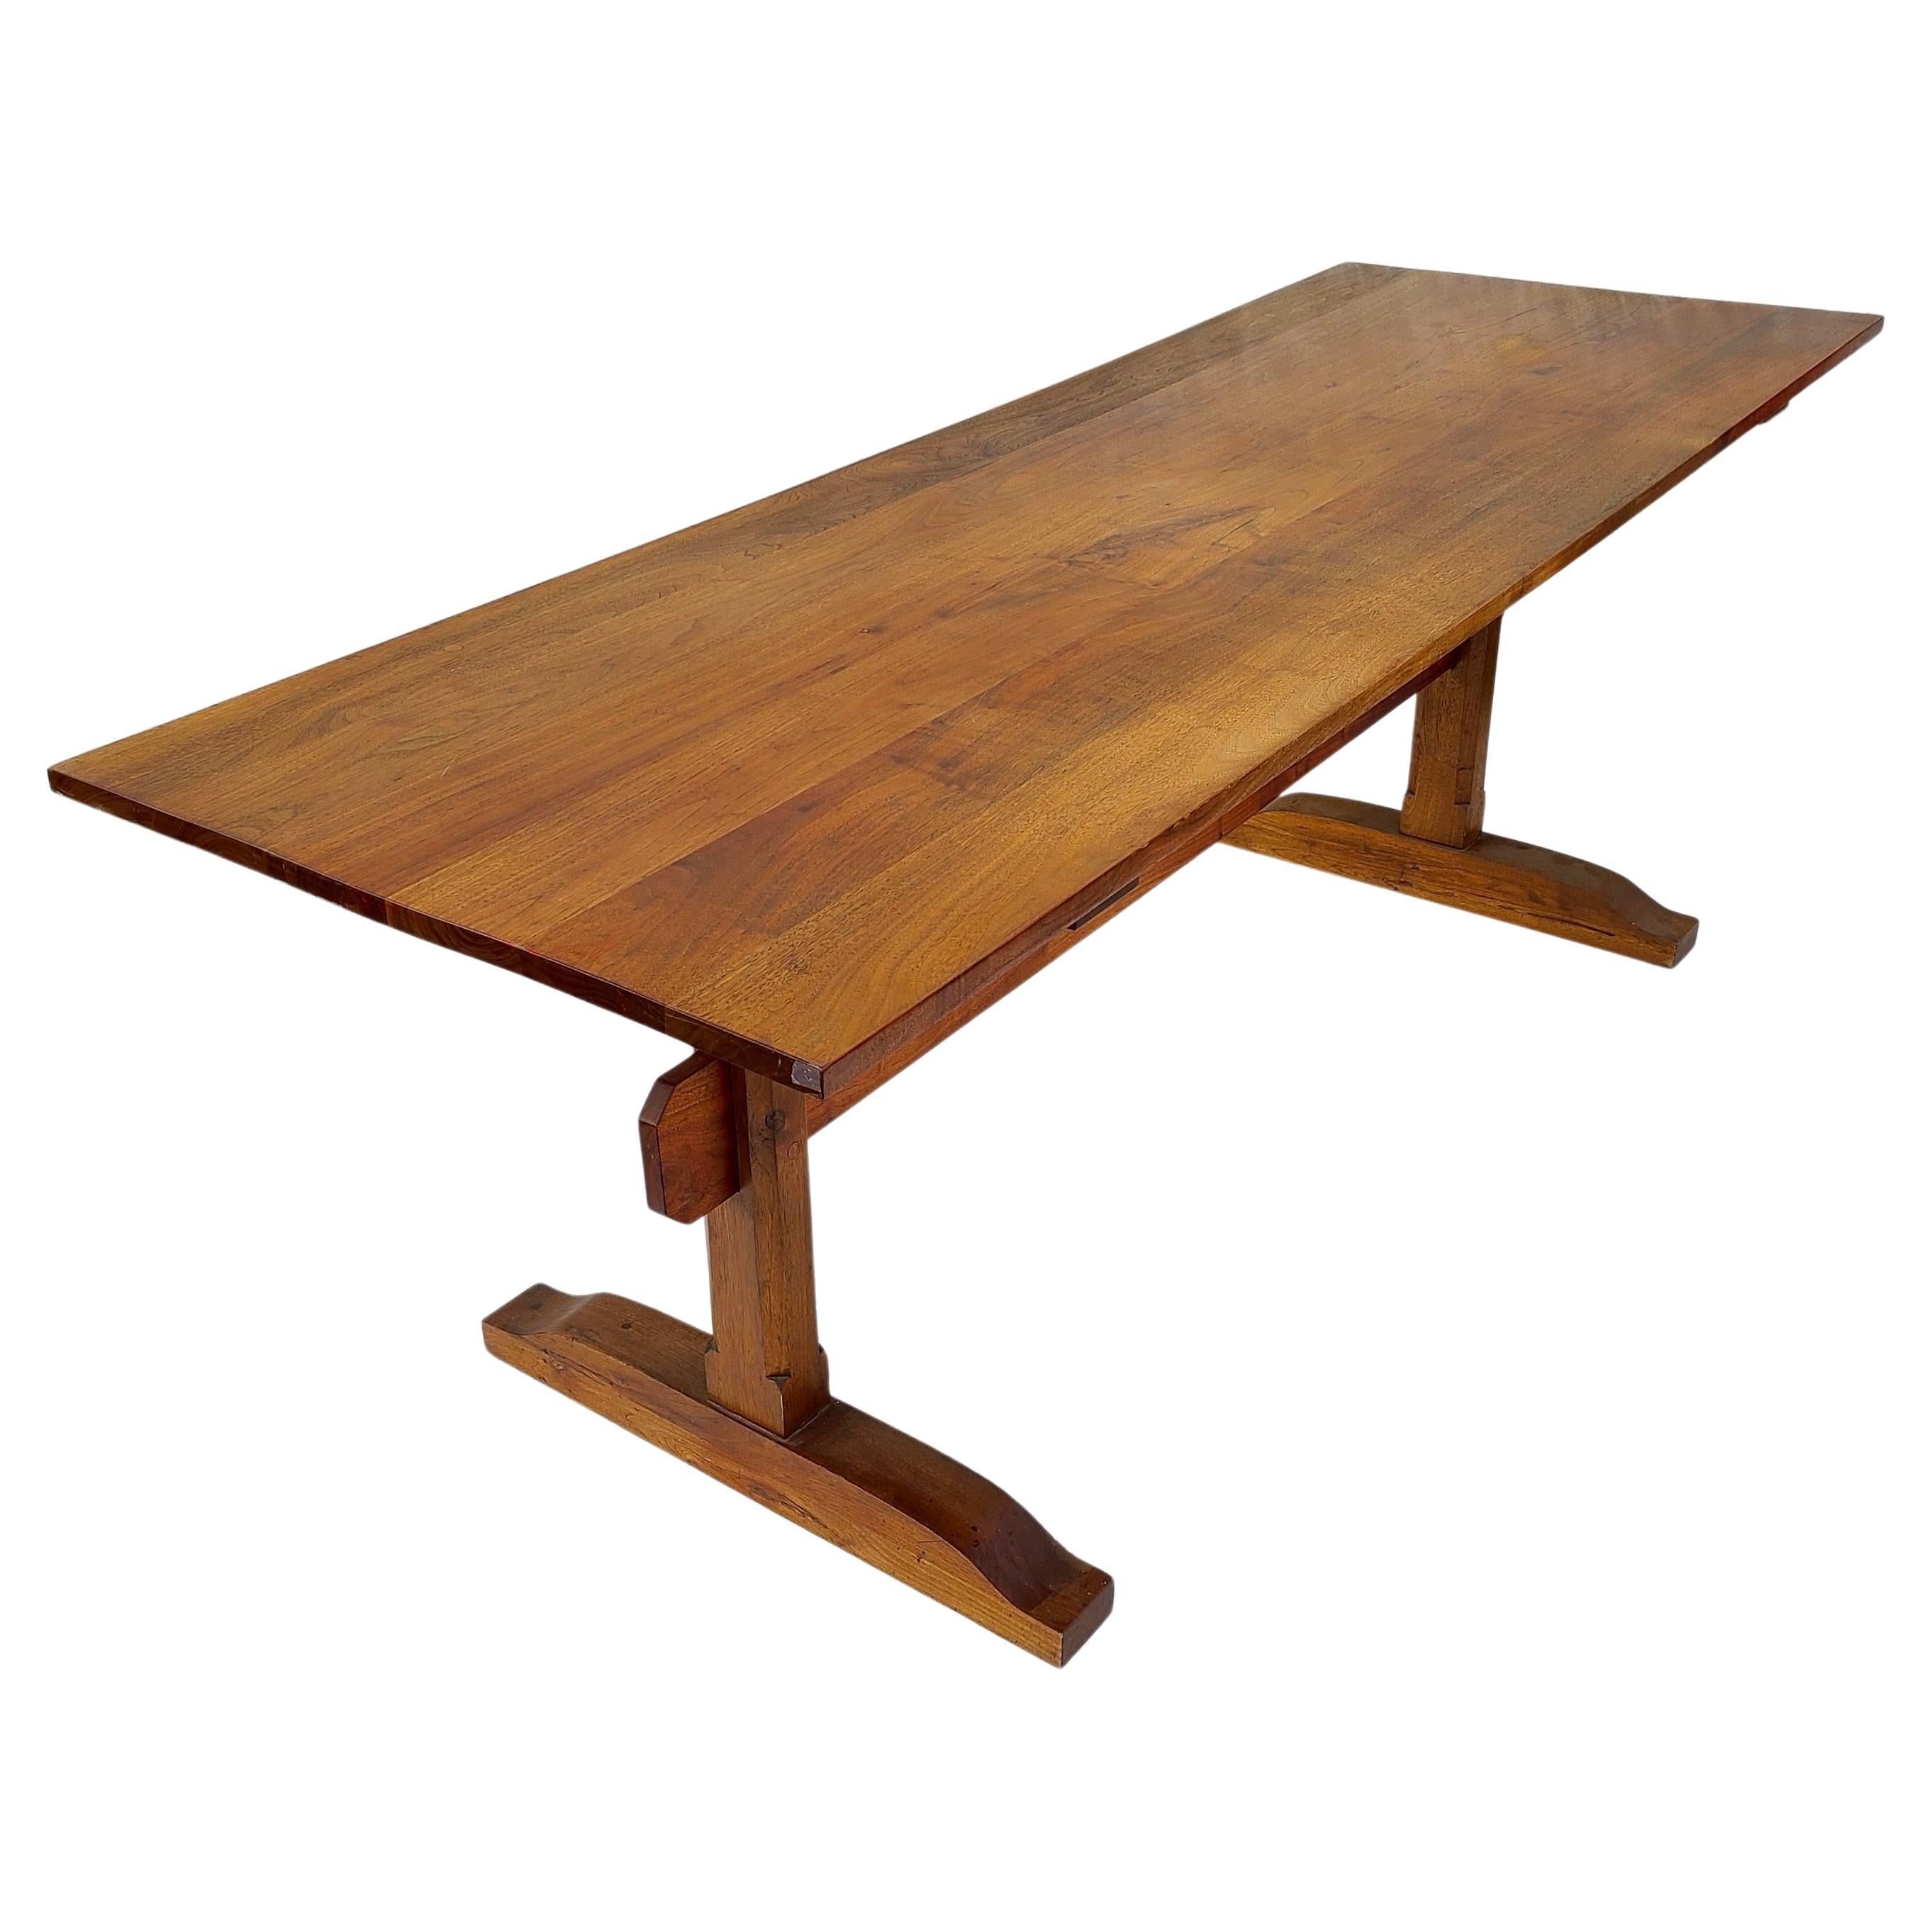 Please message us for a cost effective shipping quote to your location.

Studiocraft Walnut Trestle Dining Table.
Hand Crafted Dowel Construction. 
Long and Narrow dimensions make for cozy dining, 
and perhaps conversations at each end.
 